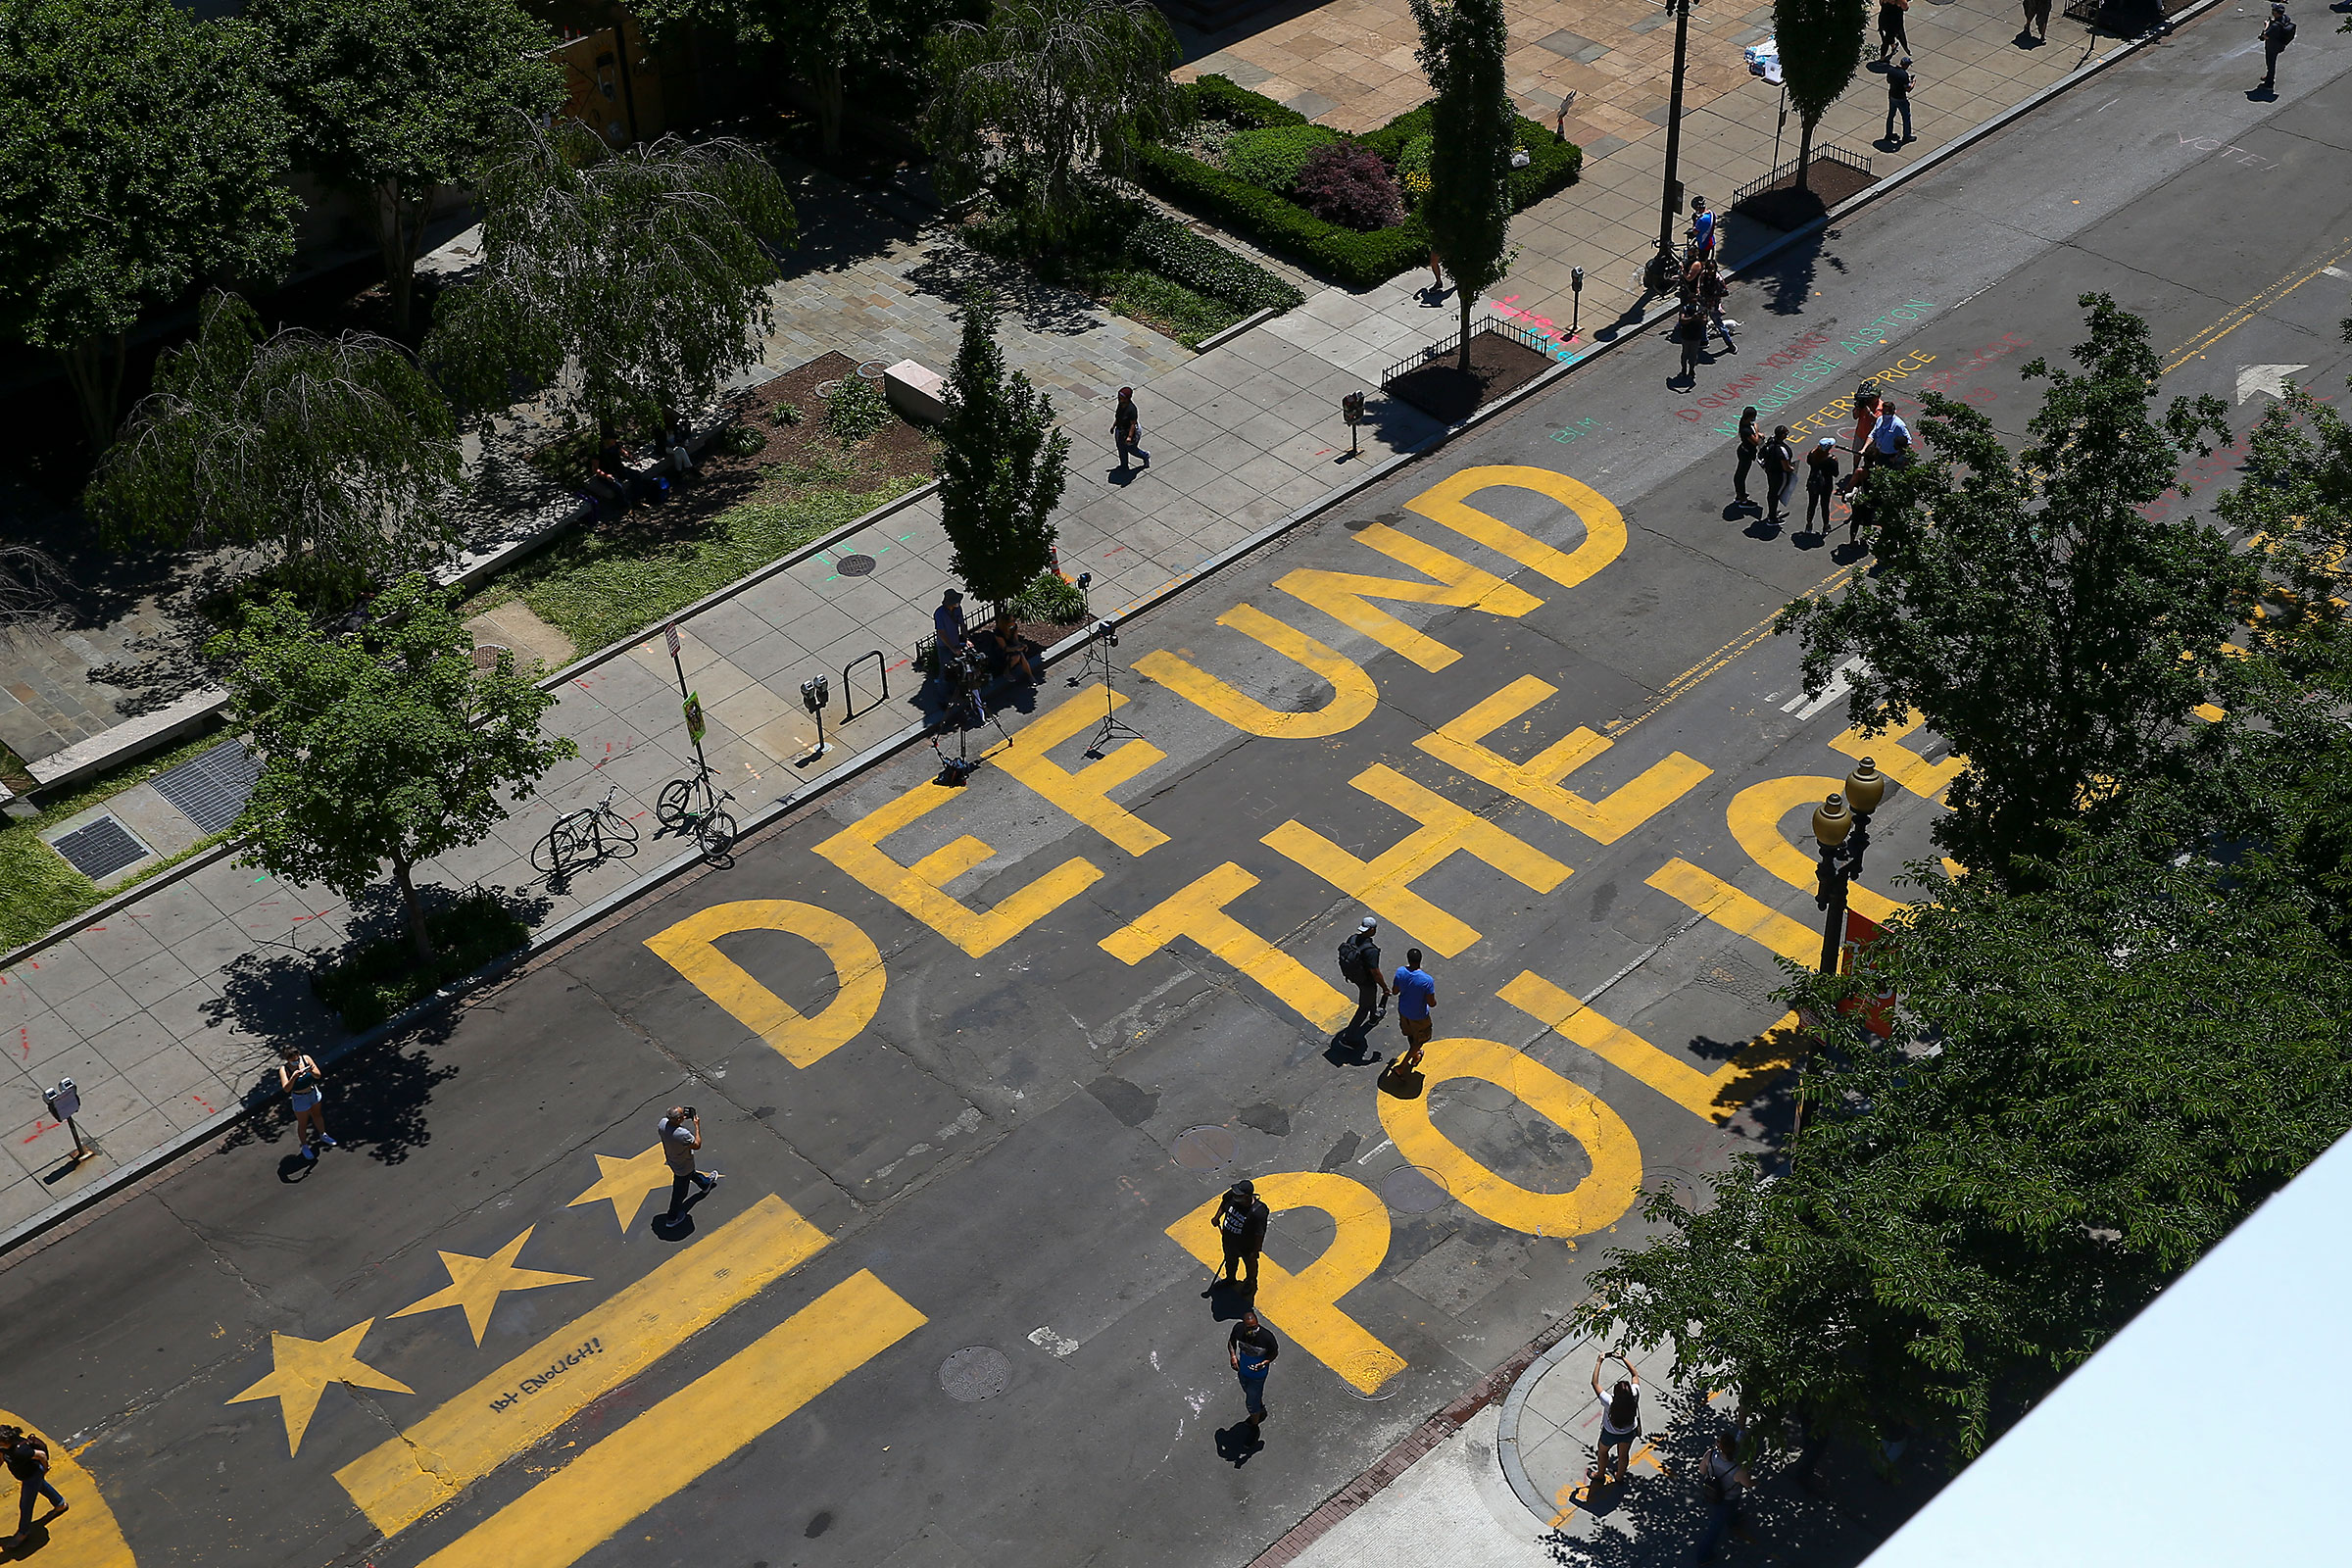 “Defund The Police” was painted on the street near the White House in Washington, D.C. (Tasos Katopodis—Getty Images)